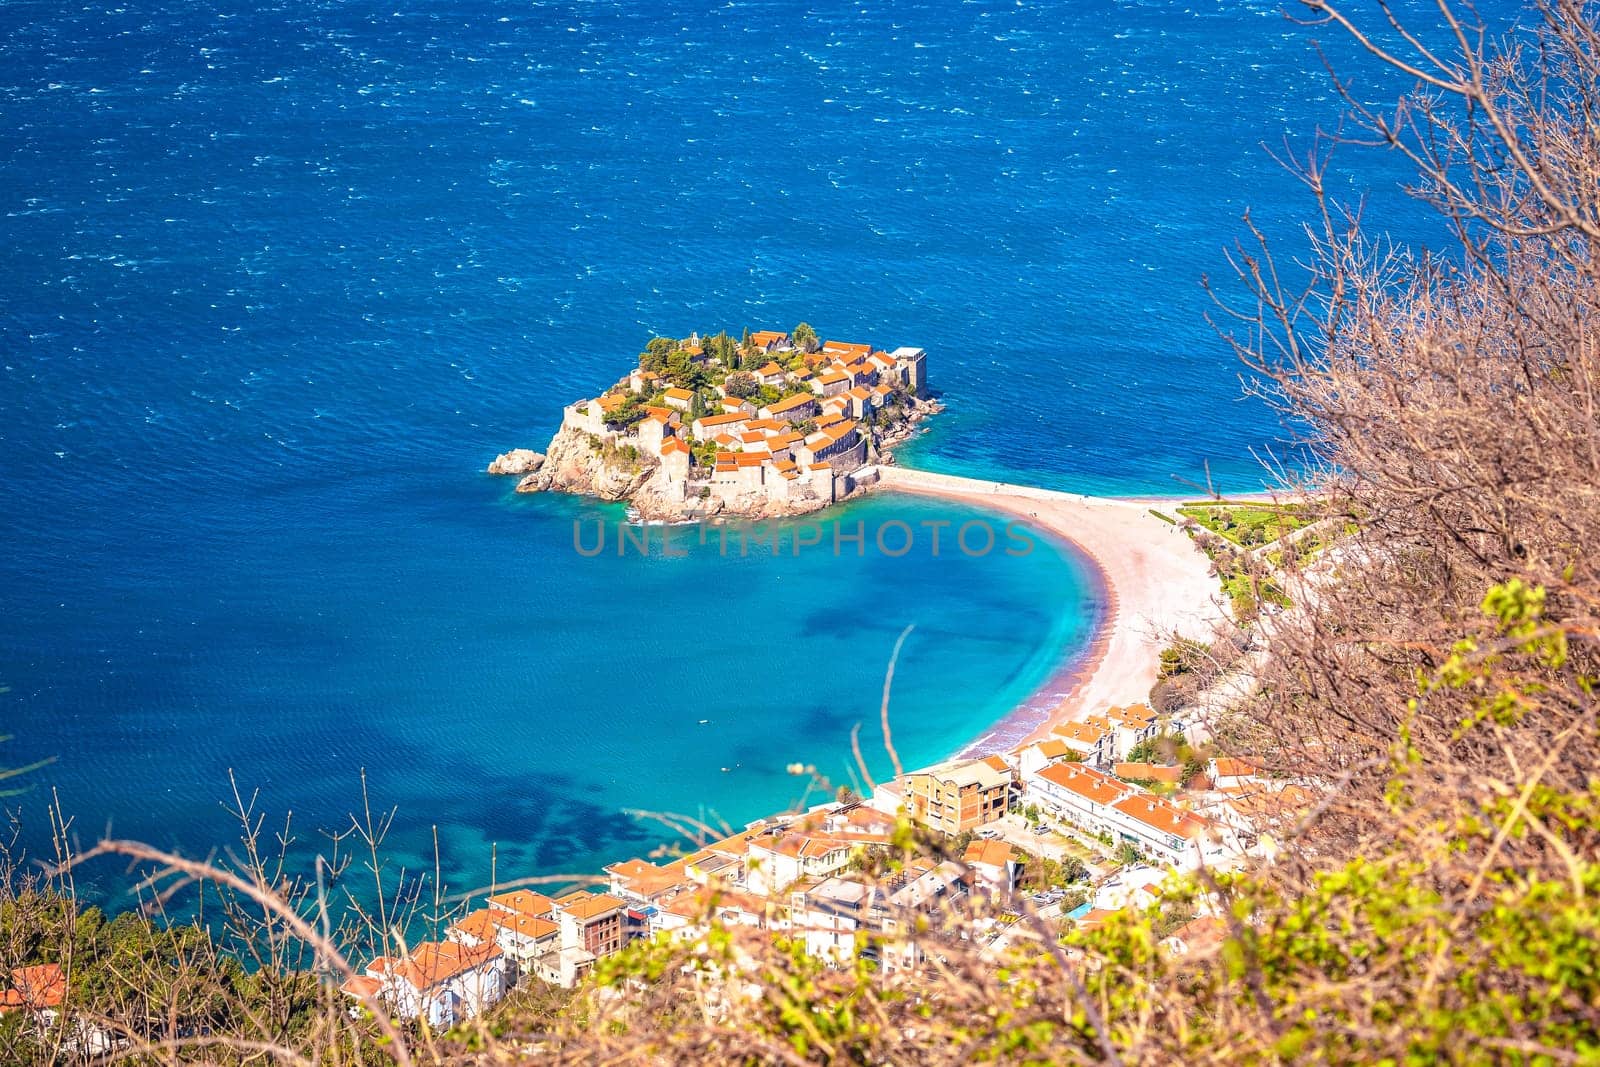 Sveti Stefan historic island village and waterfront view by xbrchx